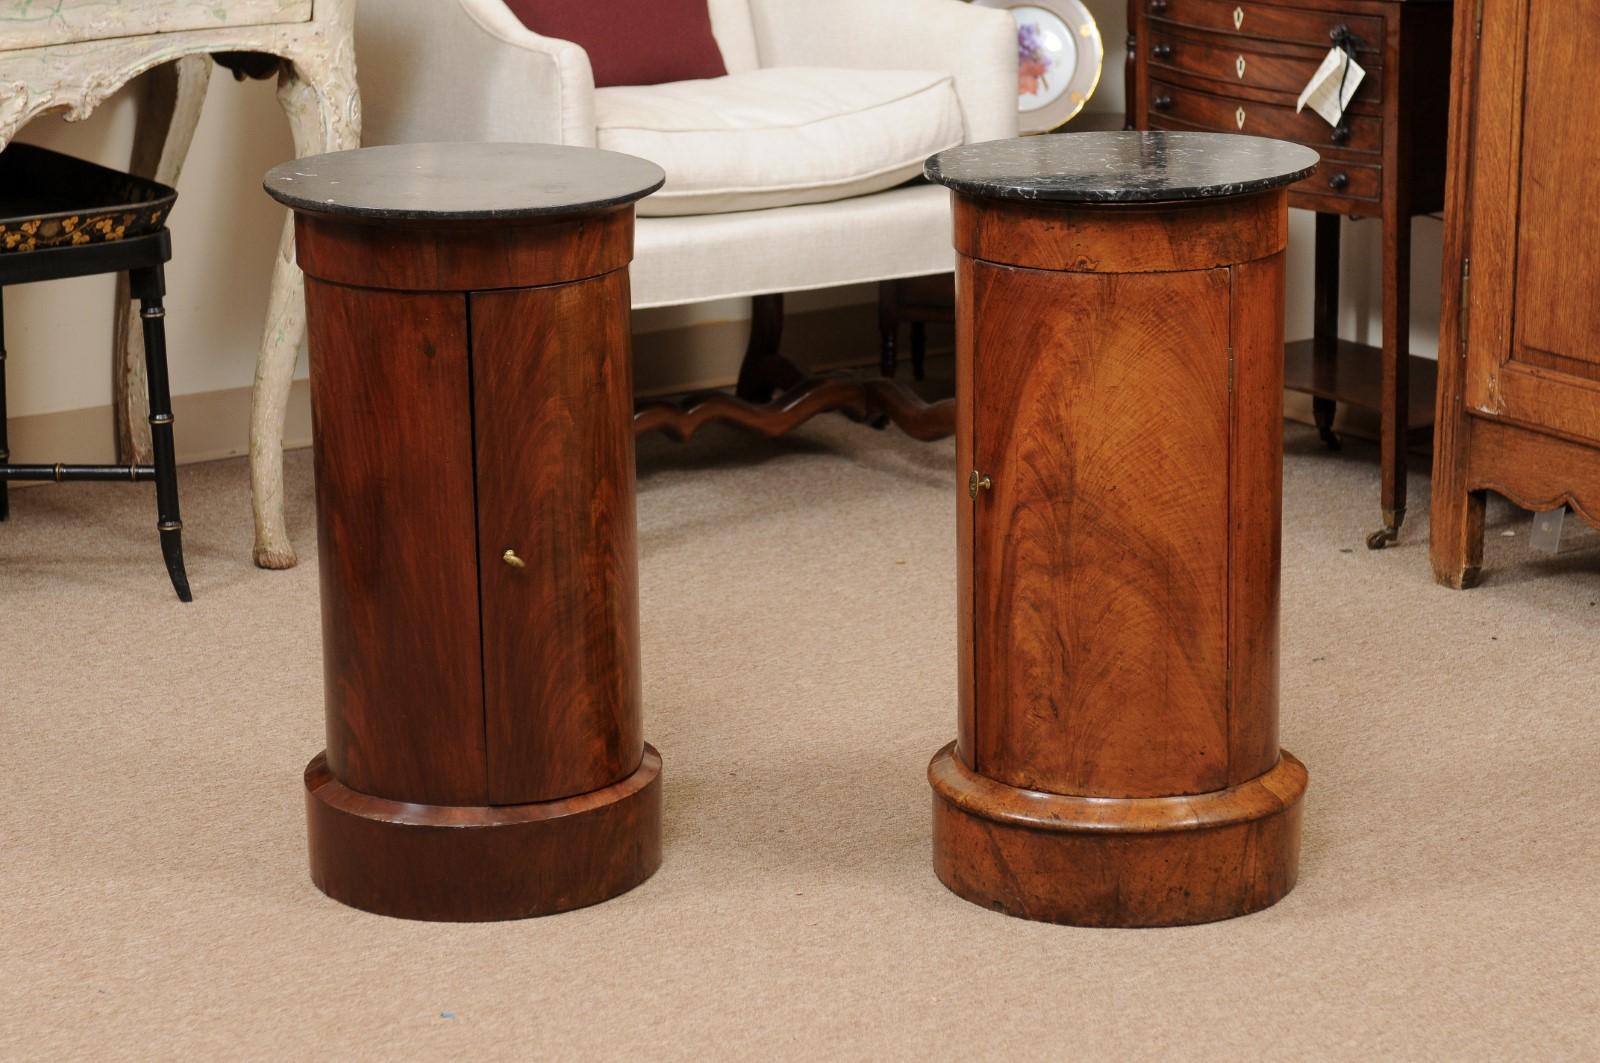 Matched Pair of Cylindrical Cabinets in Mahogany with Black Marble Tops 3